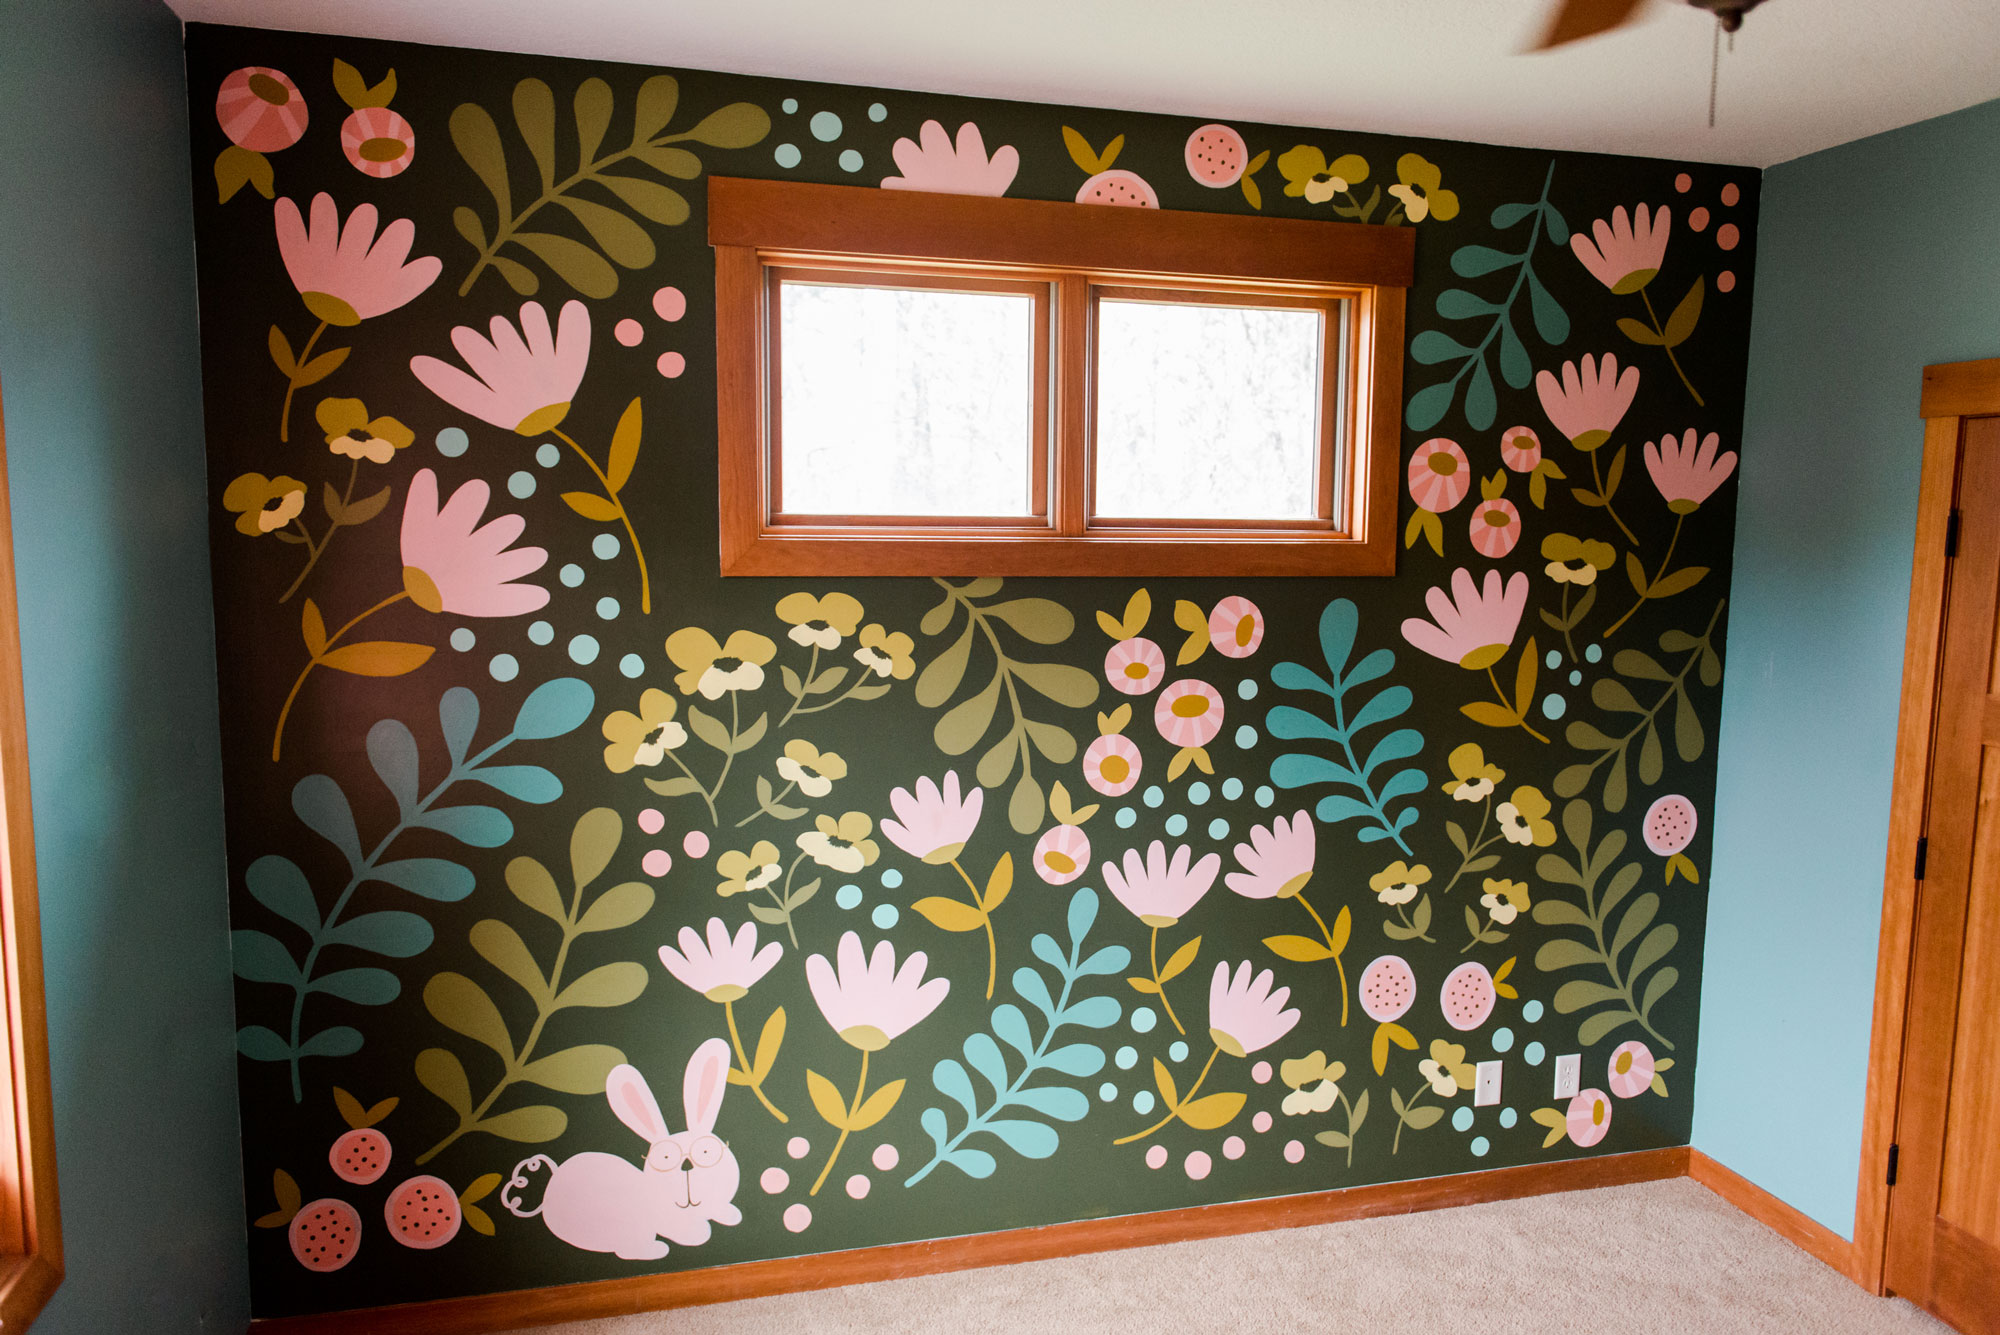 How to paint a floral wall mural, Floral painting DIY, bedroom mural, bedroom floral mural, mural for a bedroom, floral bedroom mural